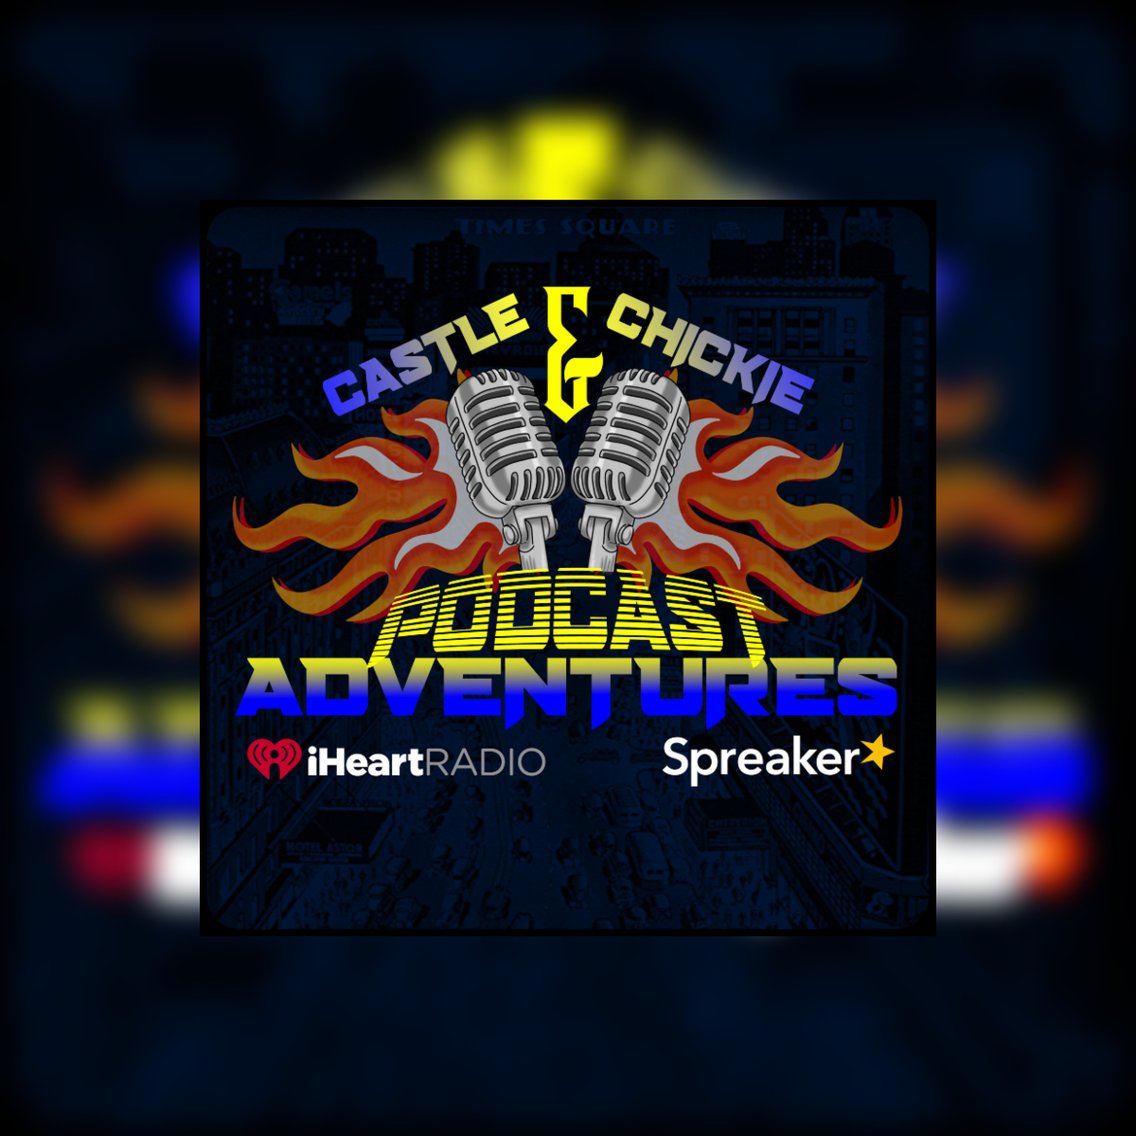 CASTLE & CHICKIE PODCAST ADVENTURES - Cover Image